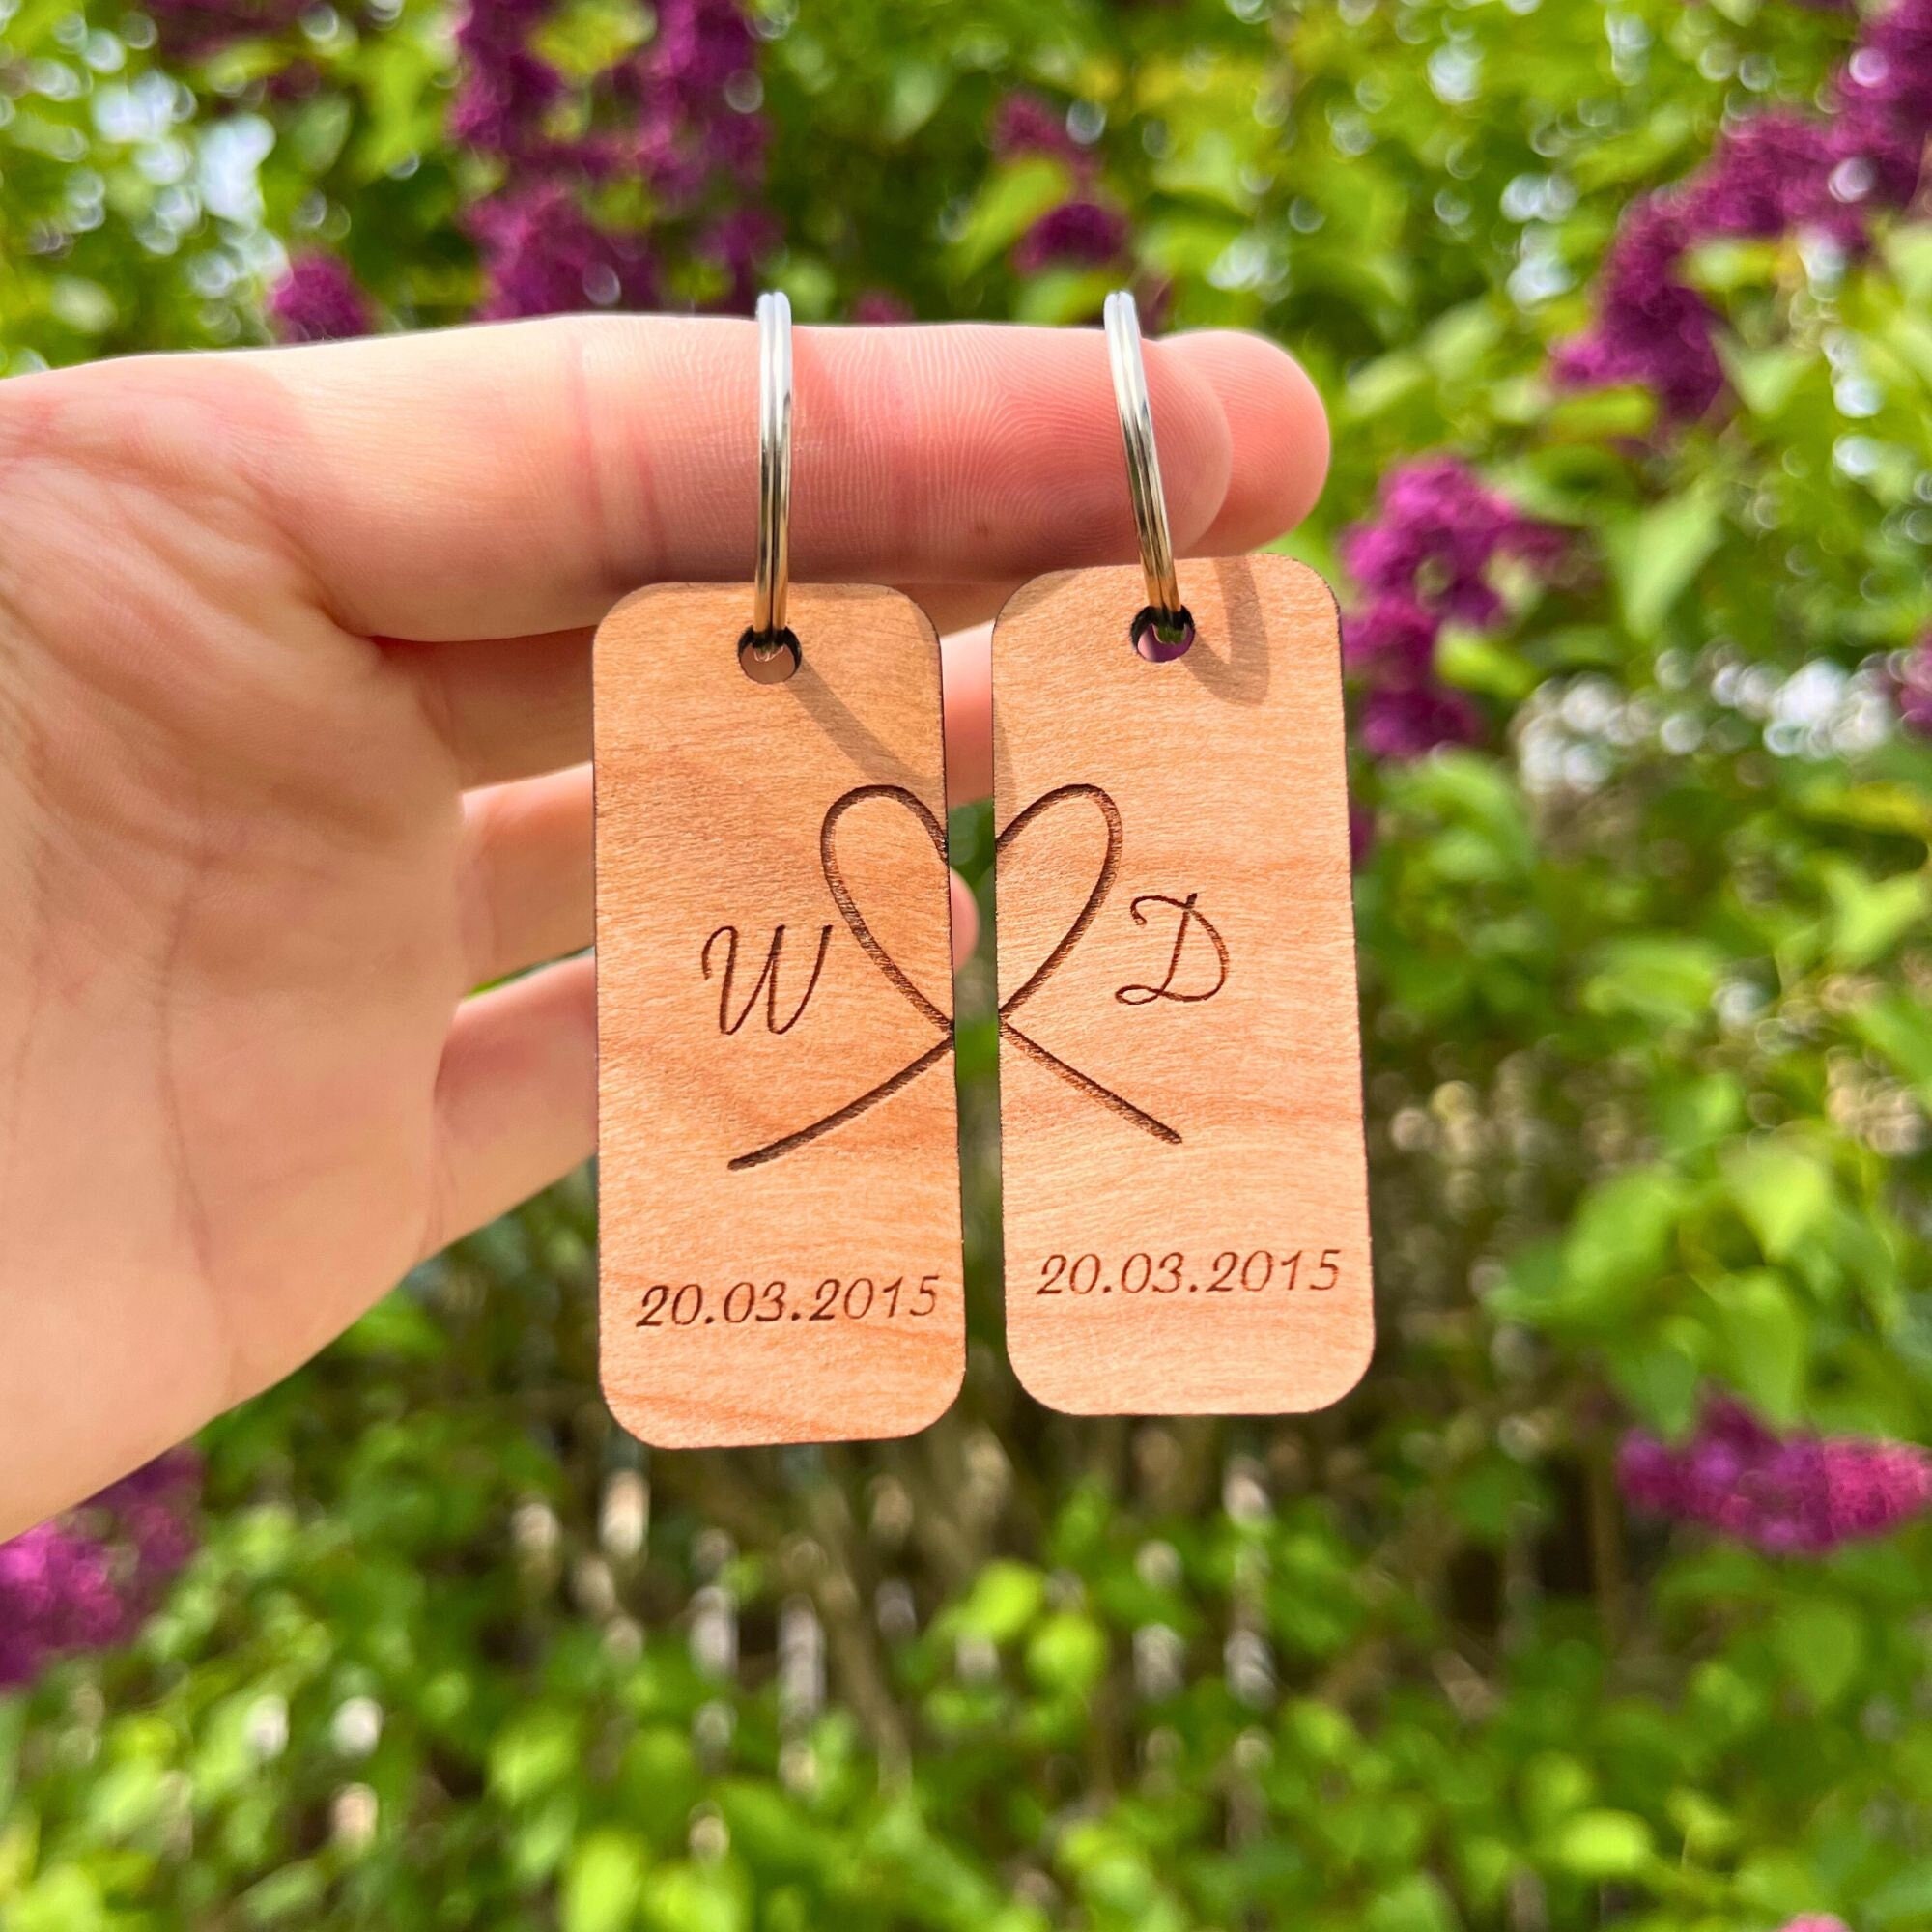 Valentine Couple Keychain, Couples Gifts for Boyfriend Girlfriend Birthday,  Keychain Matching Couple Stuff Wooden Spoof, Wedding gifts for her him for